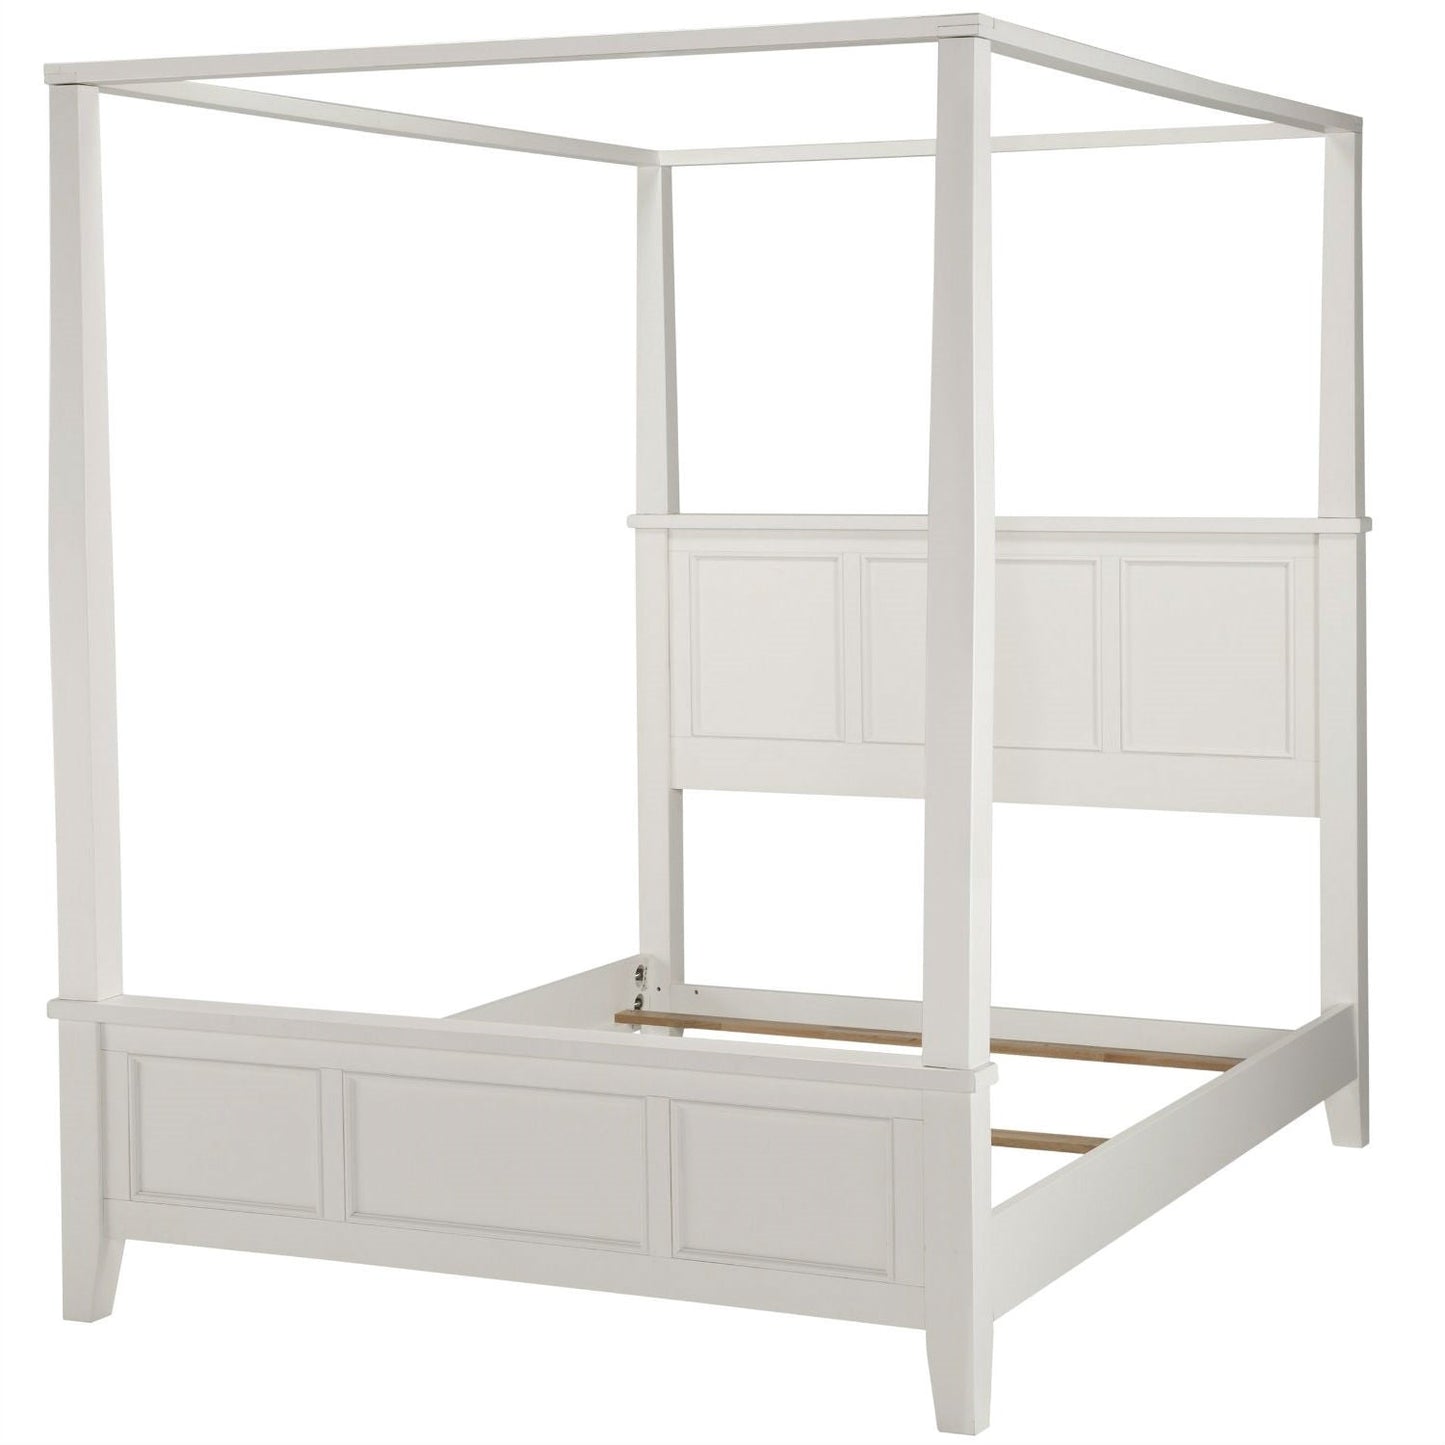 Bedroom > Bed Frames > Canopy Beds - Queen Size Canopy Bed In Contemporary White Wood Finish